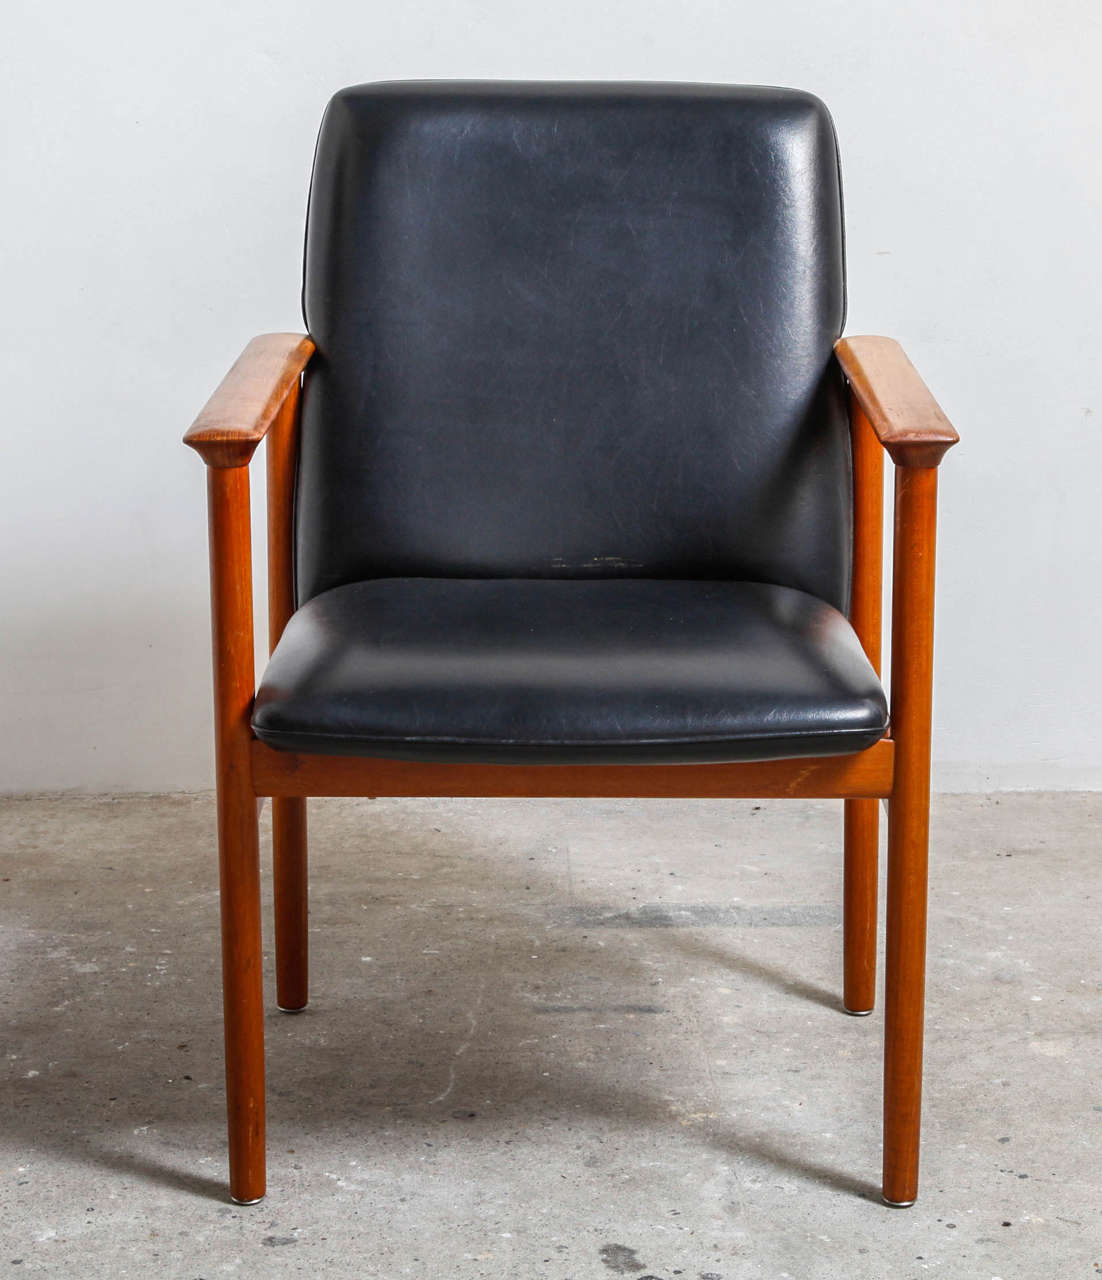 Armchair, model diplomat.
This set of two chairs by Arne Vodder for Sibast features solid rosewood frames with original black leather cushioned seats.